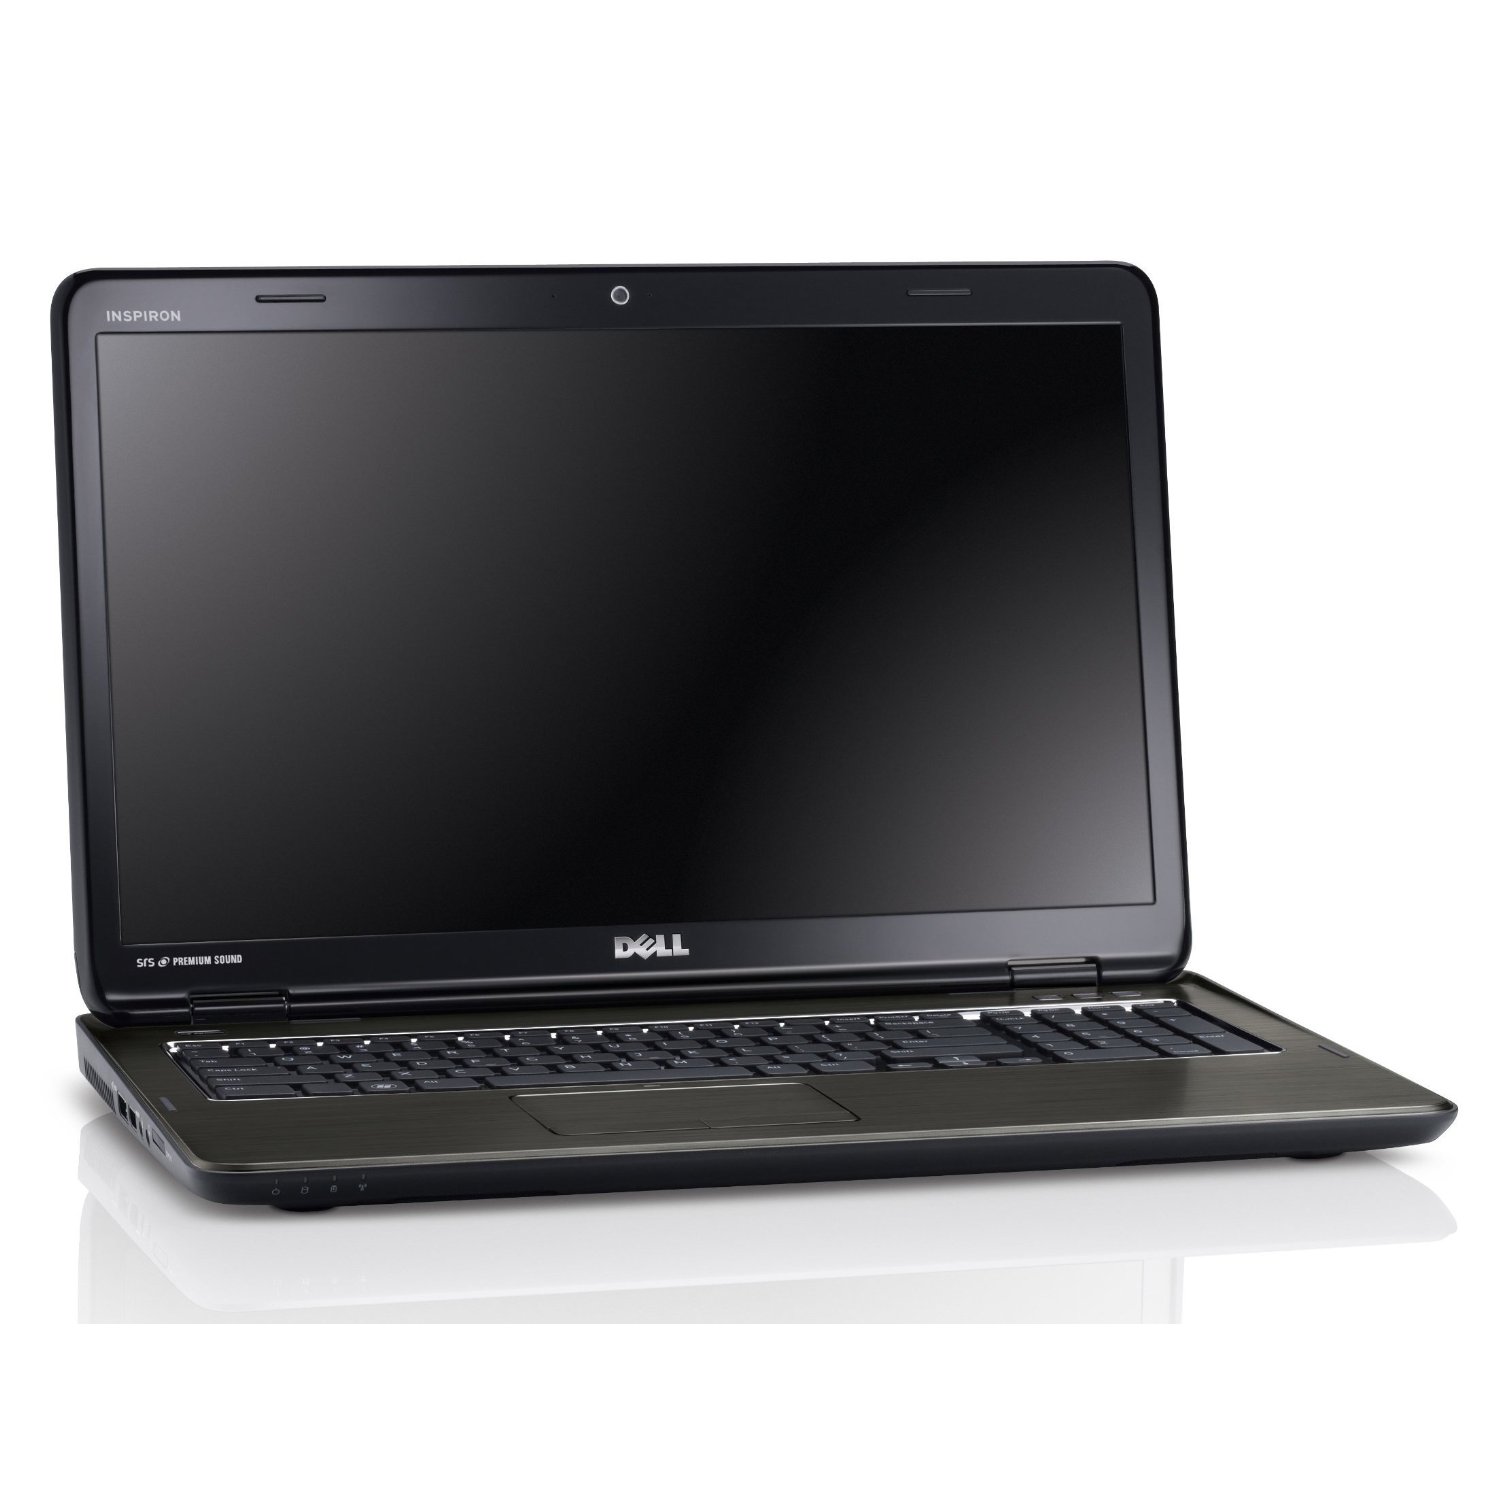 http://thetechjournal.com/wp-content/uploads/images/1201/1327168457-dell-inspiron-17rn-i17rn4709dbk-173inch-laptop-4.jpg